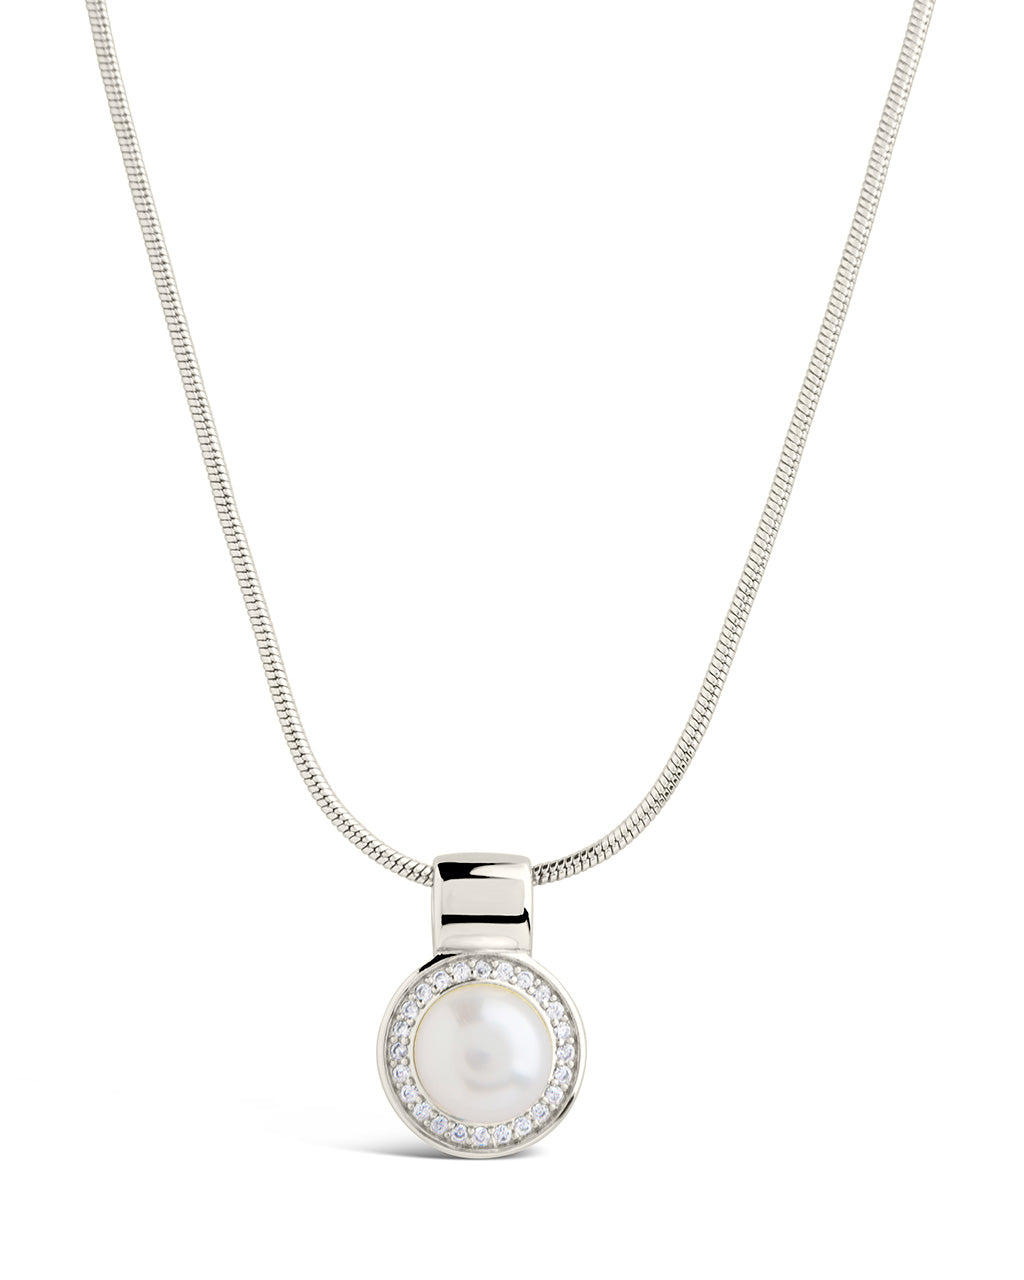 Idalia Pendant Necklace Sterling Forever Silver 